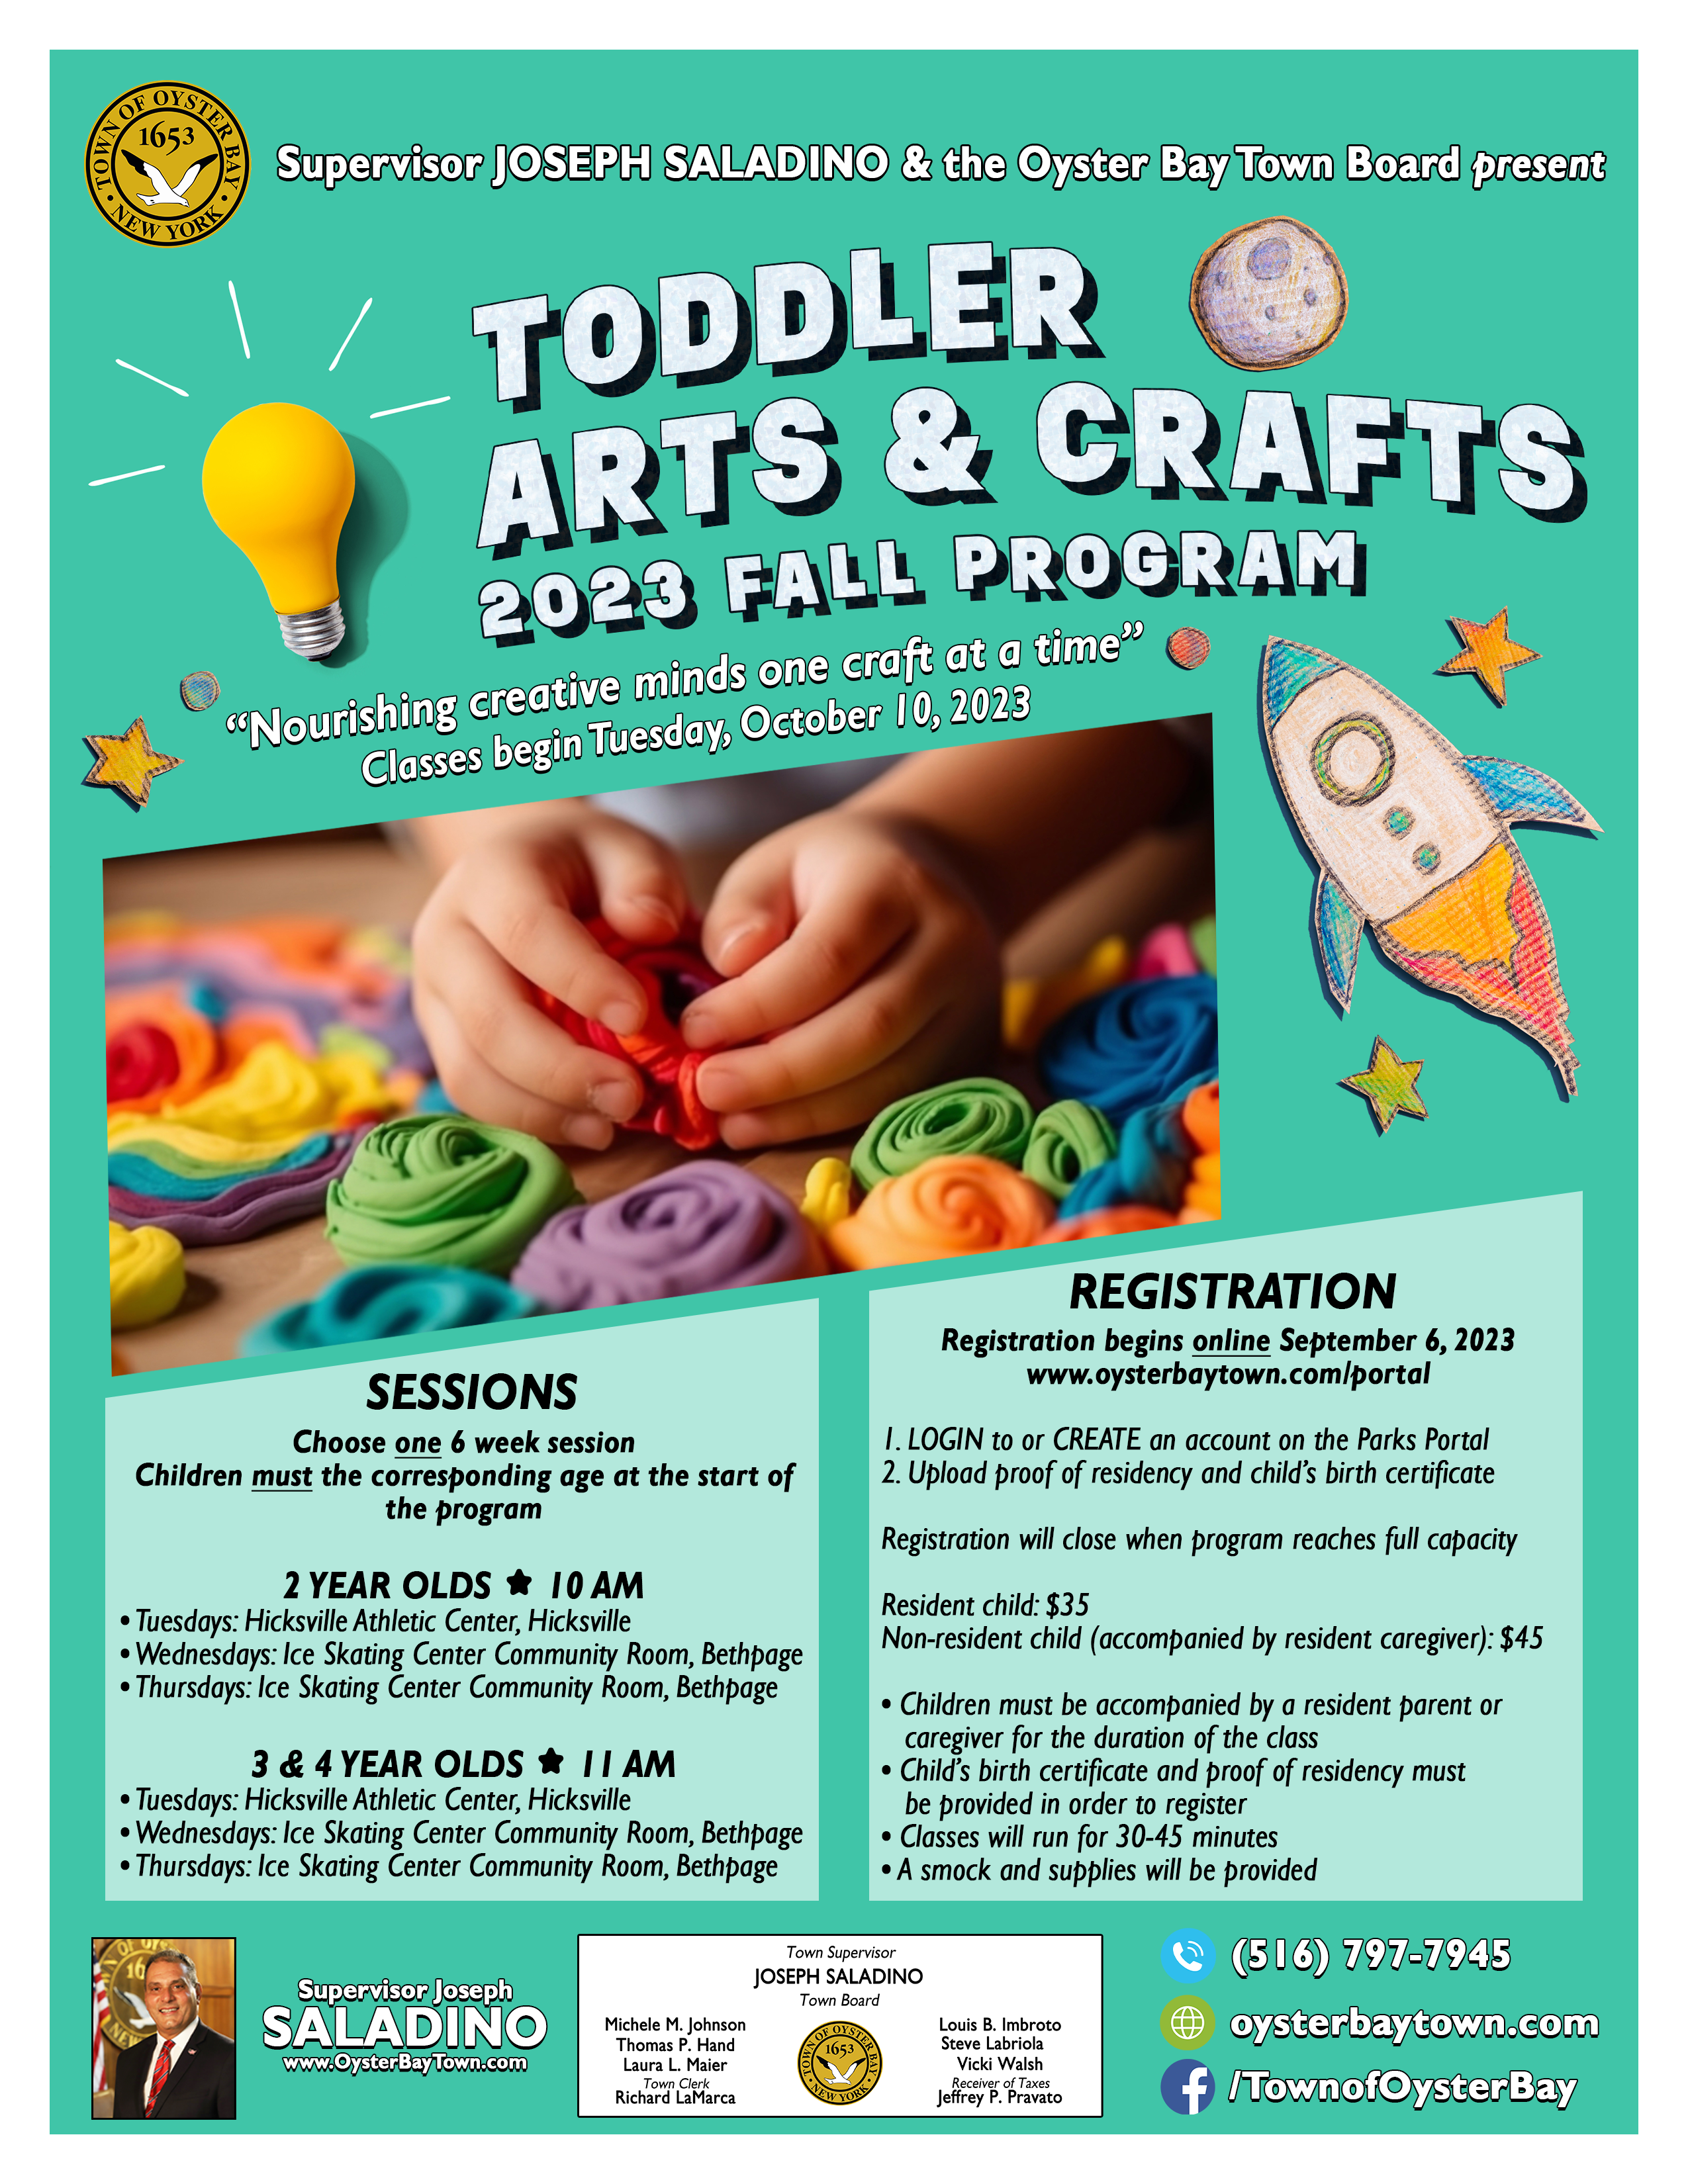 https://oysterbaytown.com/wp-content/uploads/toddler-arts-and-crafts-fall-2023-1.png